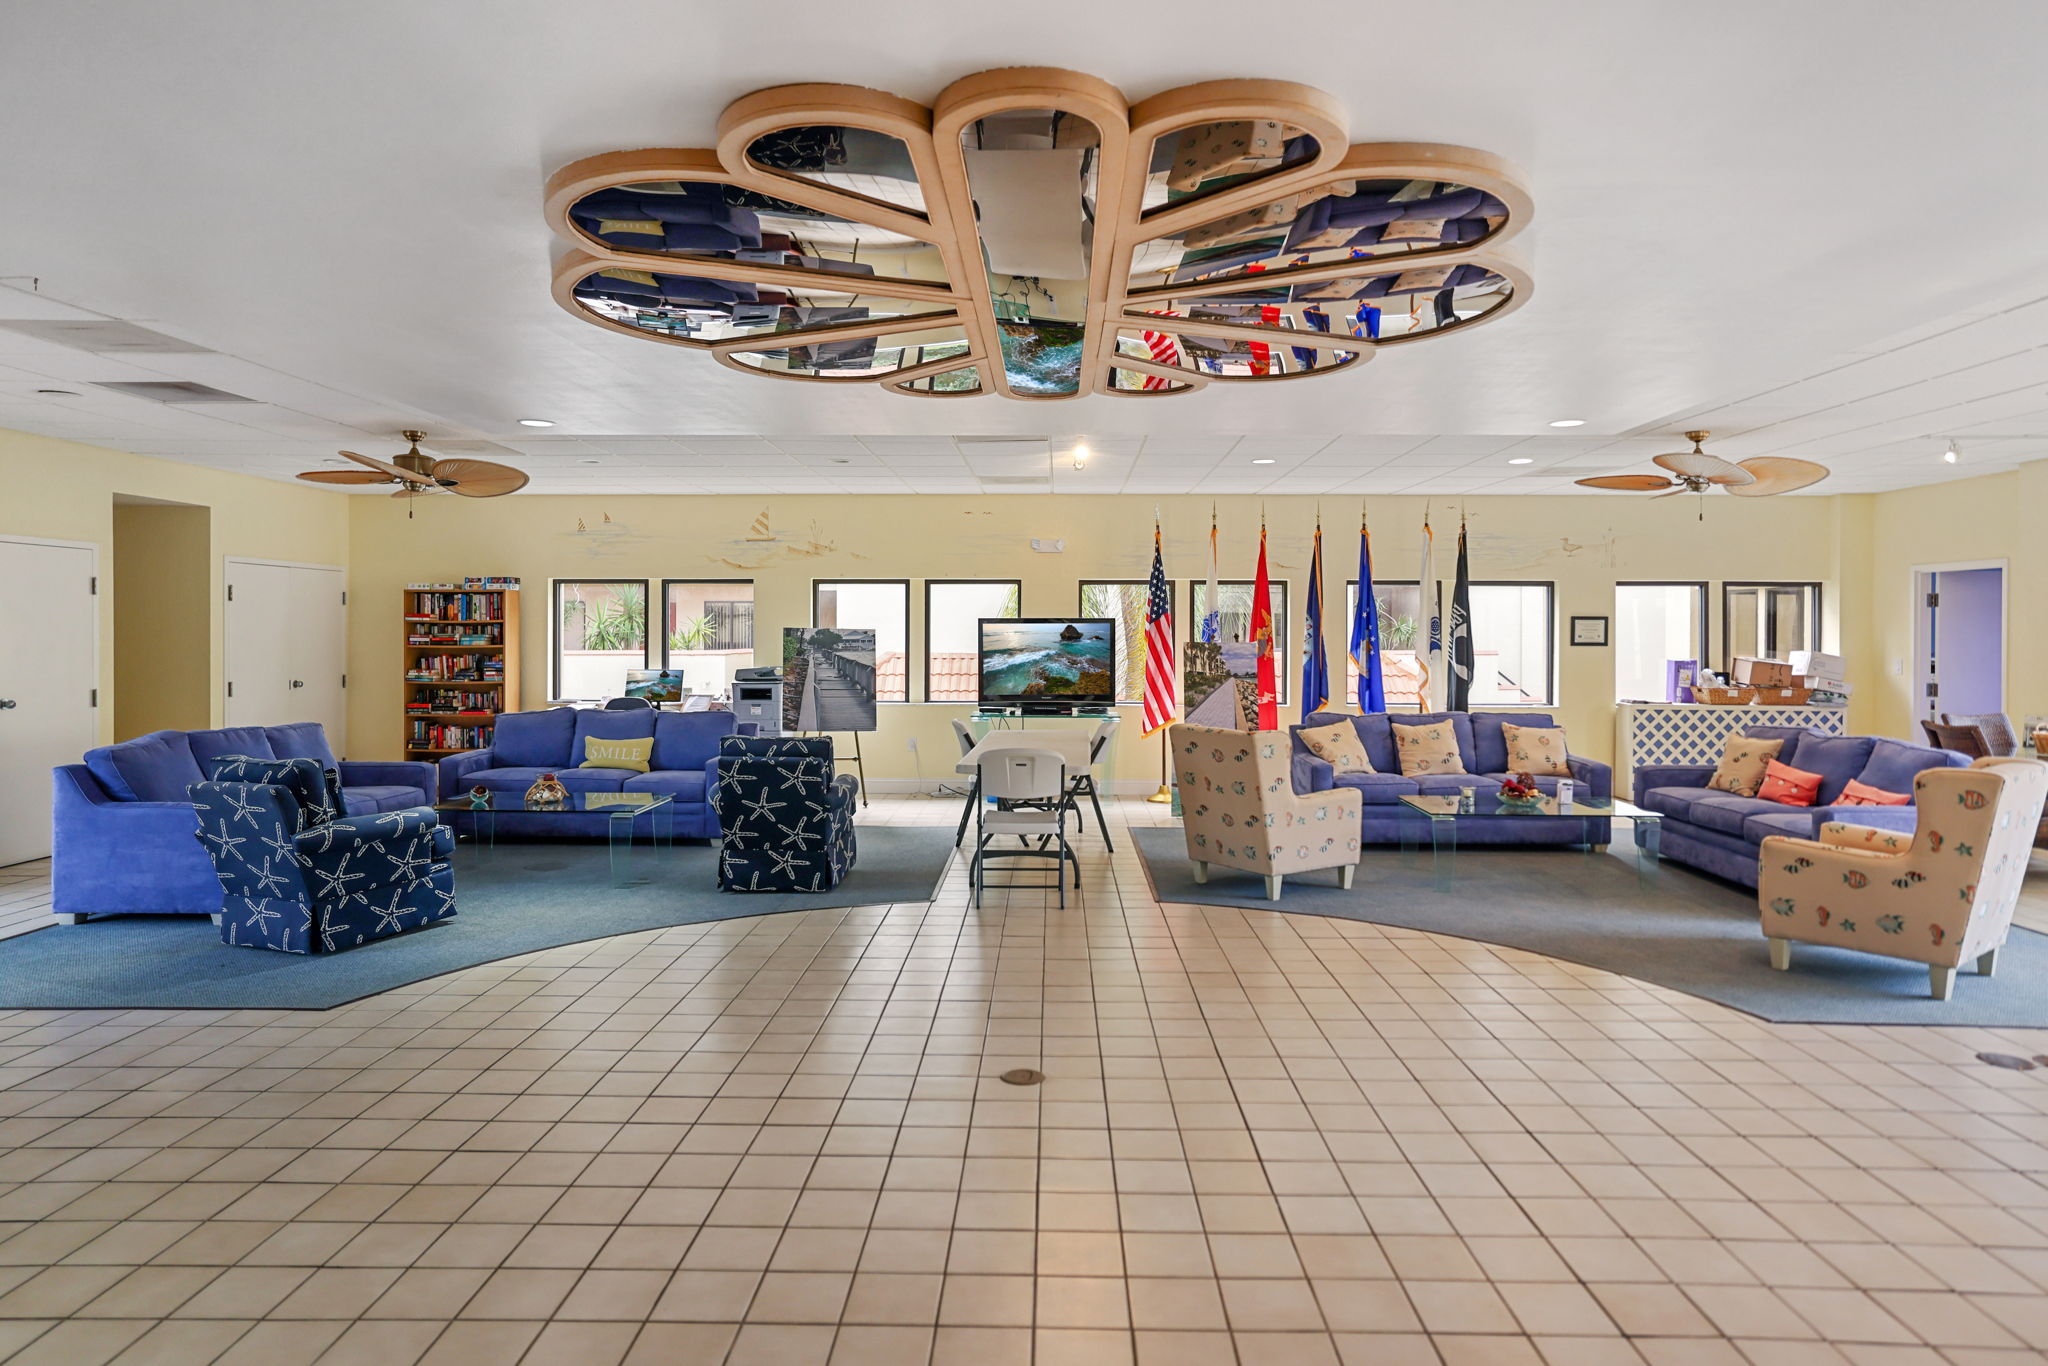 Community Clubhouse Interior - 495A5743